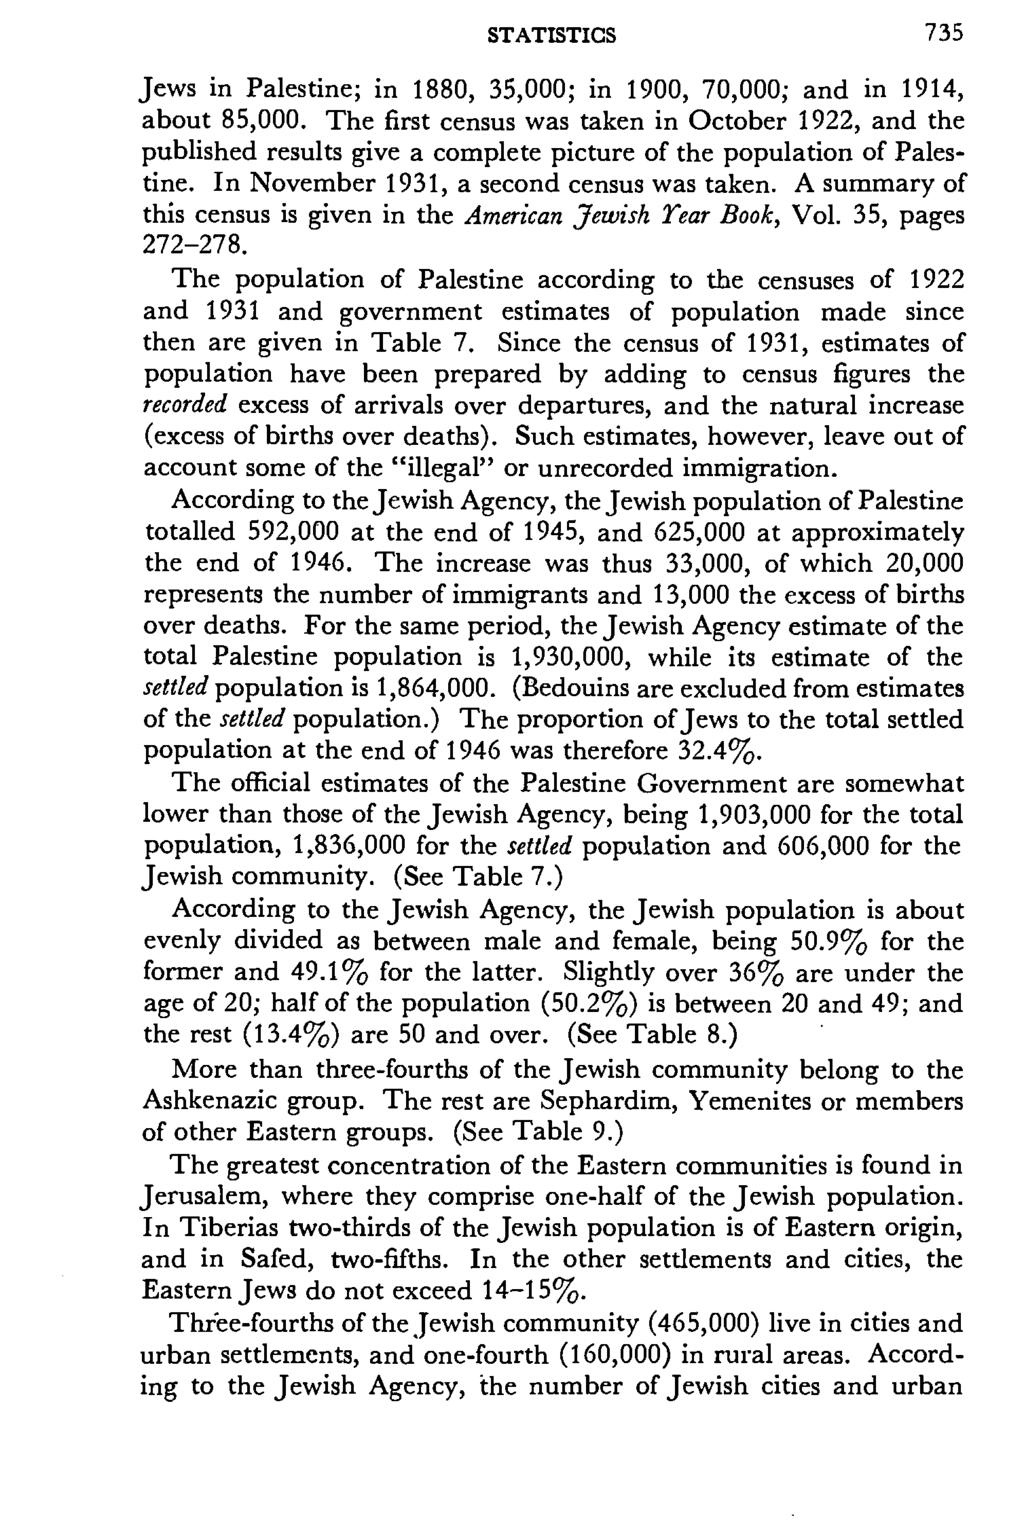 STATISTICS 735 Jews in Palestine; in 1880, 35,000; in 1900, 70,000; and in 1914, about 85,000.